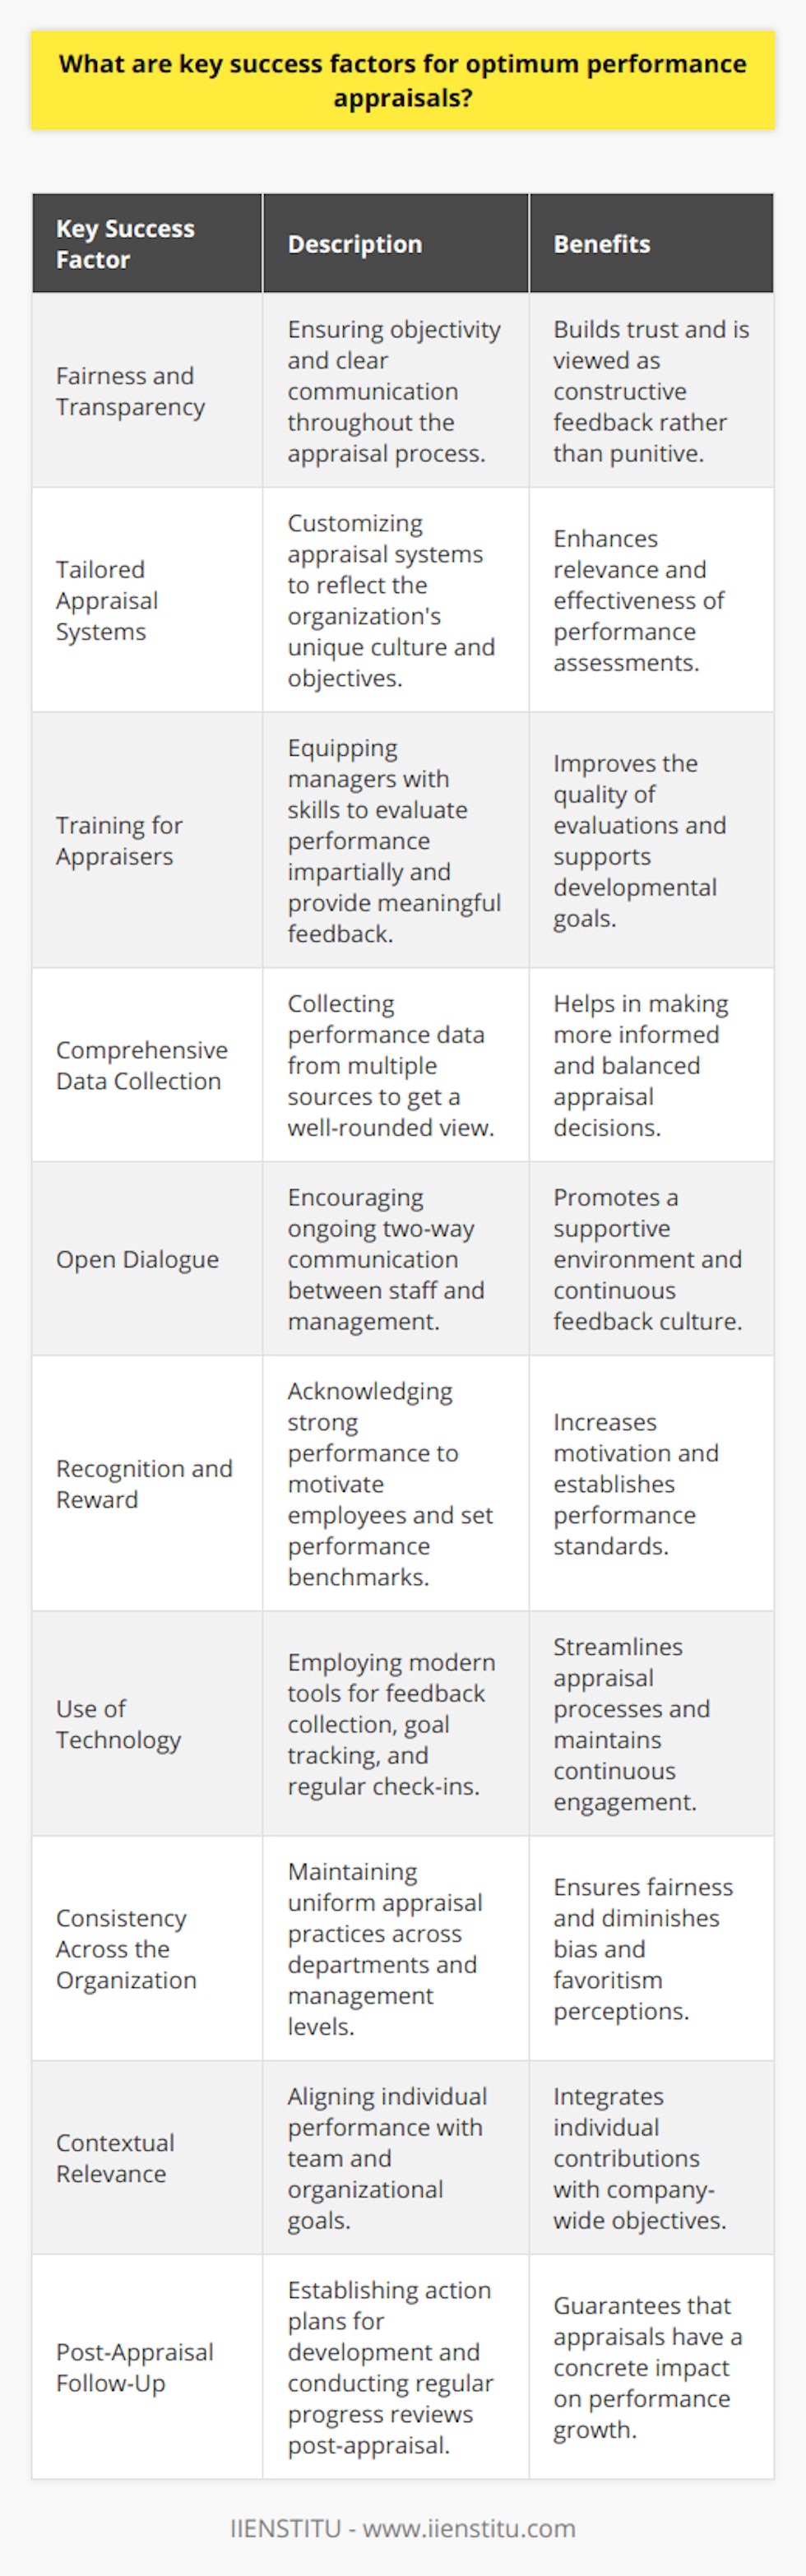 Performance appraisals are a critical component of employee development and organizational growth. When conducted effectively, they can enhance employee performance, morale, and engagement, contributing to the overall success of the organization. Here are some key success factors for optimizing performance appraisals:1. Fairness and Transparency: A fair and transparent process is essential for gaining employee trust and ensuring that appraisals are seen as an opportunity for genuine feedback and improvement, rather than an arbitrary or punitive measure. Objective criteria, clear standards, and open communication channels help in achieving this.2. Tailored Appraisal Systems: Organizations vary widely in their cultures, objectives, and workforce composition. An effective appraisal system should be tailored to reflect the unique needs and values of the organization. Utilizing platforms and systems that allow customization, such as IIENSTITU, could facilitate this customization process.3. Training for Appraisers: Managers and supervisors who conduct appraisals must be trained on how to evaluate performance fairly and provide meaningful feedback. This includes understanding biases, developing interpersonal skills, and learning how to set constructive, developmental goals.4. Comprehensive Data Collection: To ensure well-rounded appraisals, organizations need to collect data from multiple sources. This may include self-evaluations, peer reviews, and quantifiable data. A diverse array of data helps to paint a fuller picture of performance and potential.5. Open Dialogue: Encouraging open communication between employees and managers fosters a supportive environment in which feedback is shared regularly, not just during formal appraisals. This dialogue should be two-way, where employees also feel comfortable voicing their concerns and aspirations.6. Recognition and Reward: Recognizing and rewarding strong performance is a crucial part of the appraisal process. When employees are acknowledged for their contributions, it not only motivates them but also sets a benchmark for standards within the organization.7. Use of Technology: Modern technology can enhance the performance appraisal process through tools for regular check-ins, gathering 360-degree feedback, and tracking the progress of goals. These technologies can streamline the process and help maintain continuous employee engagement.8. Consistency Across the Organization: The appraisal process should be consistent across different departments and levels of management. This consistency ensures fairness and reduces perceptions of bias or favoritism throughout the organization.9. Contextual Relevance: Performance should be assessed not only in terms of individual contributions but also in the context of team and organizational outcomes. Understanding the bigger picture helps align individual performance with broader organizational goals.10. Post-Appraisal Follow-Up: After appraisals, a concrete plan of action should be established for further development. Additionally, regular follow-ups to review progress towards development goals help ensure that performance appraisals lead to tangible results.By focusing on these key success factors, organizations can create a performance appraisal process that is comprehensive, fair, and growth-oriented, ultimately leading to an empowered and high-performing workforce.